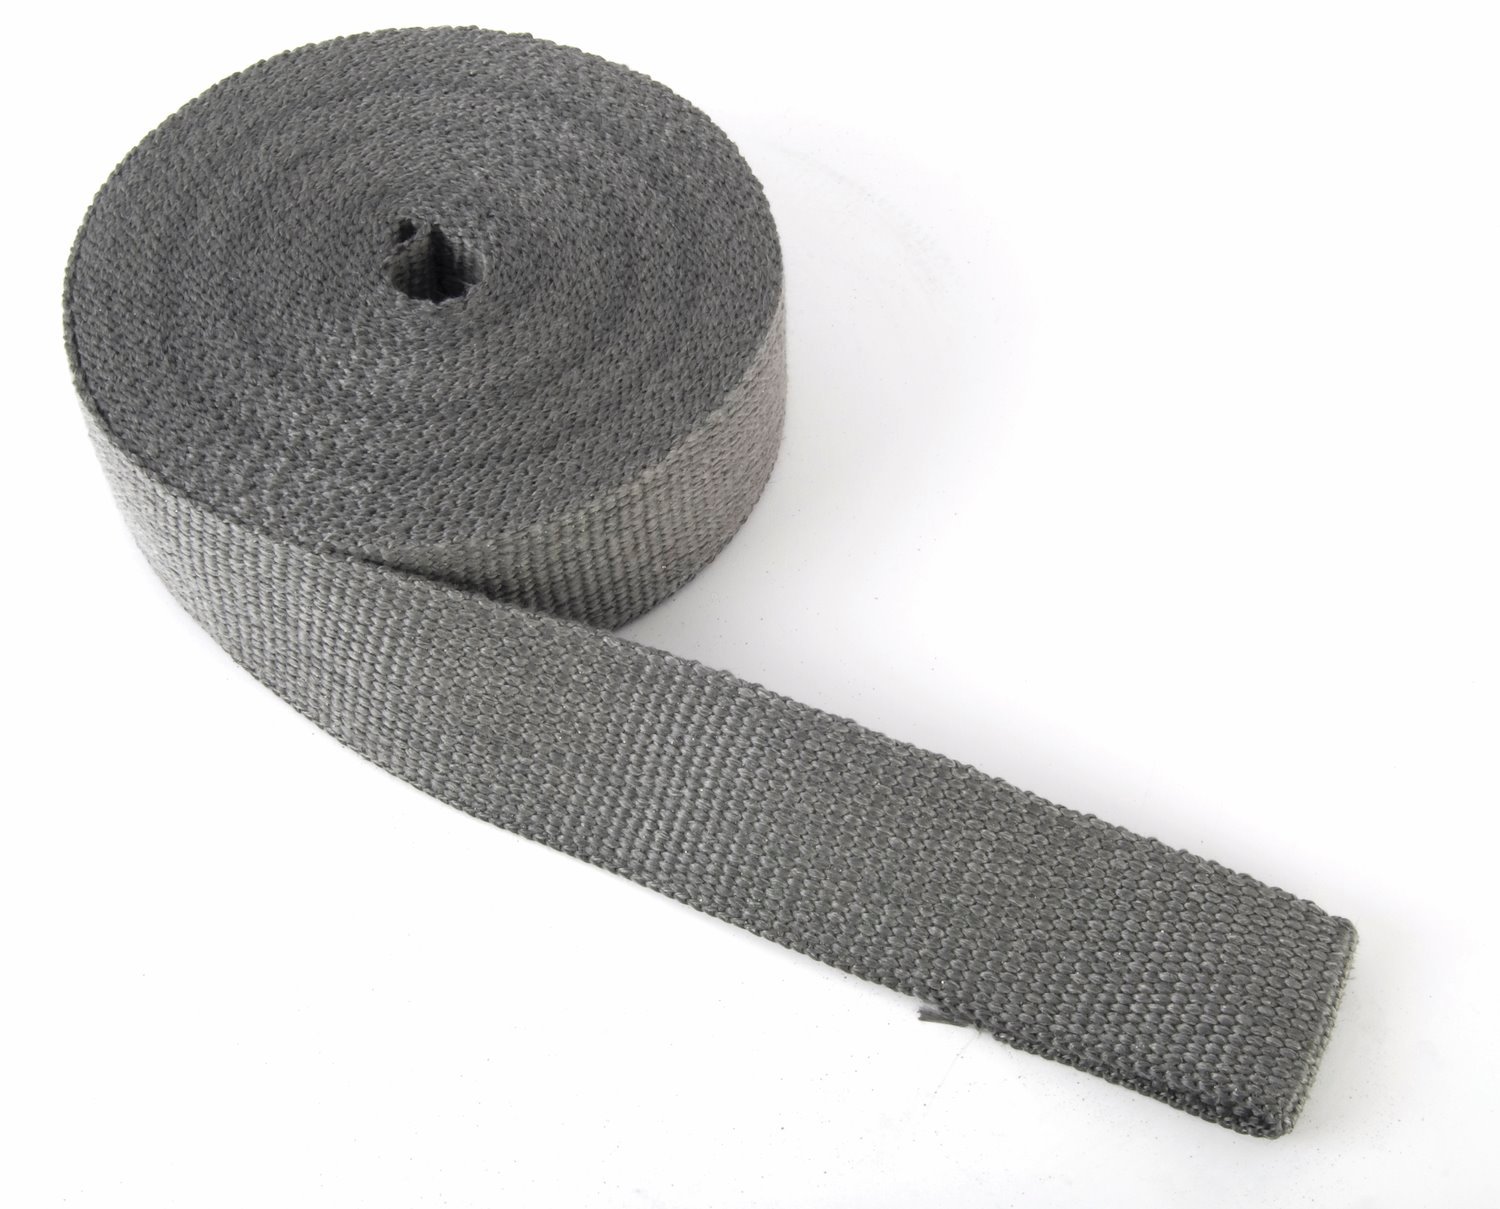 Exhaust & Header Wrap 2 in. x 50 ft. x 1/16 in. Thick